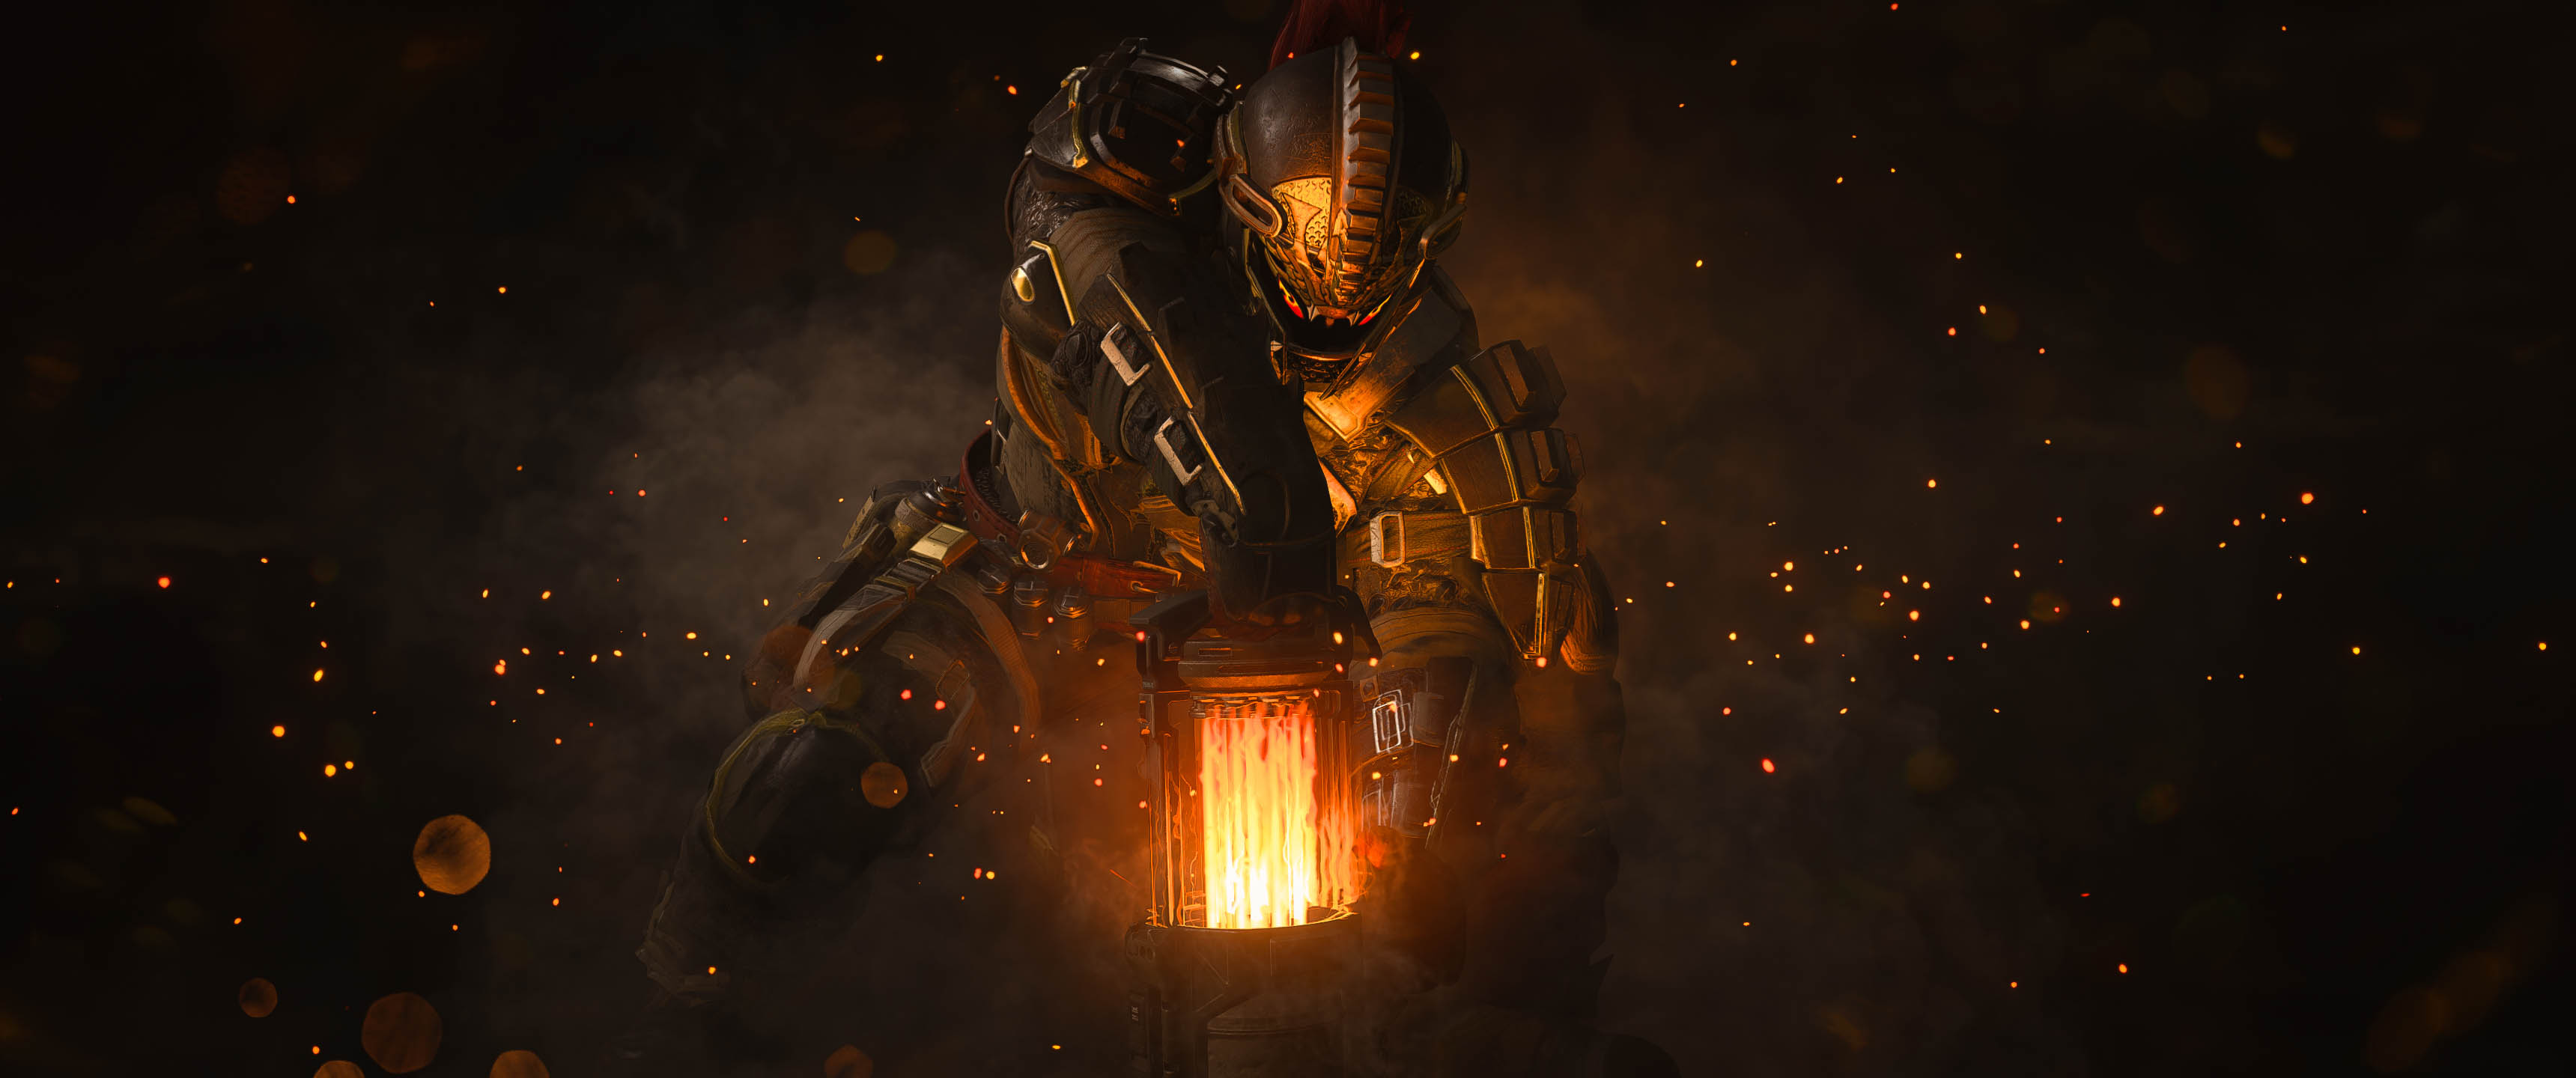 Video Game Call Of Duty: Black Ops 4 HD Wallpaper | Background Image